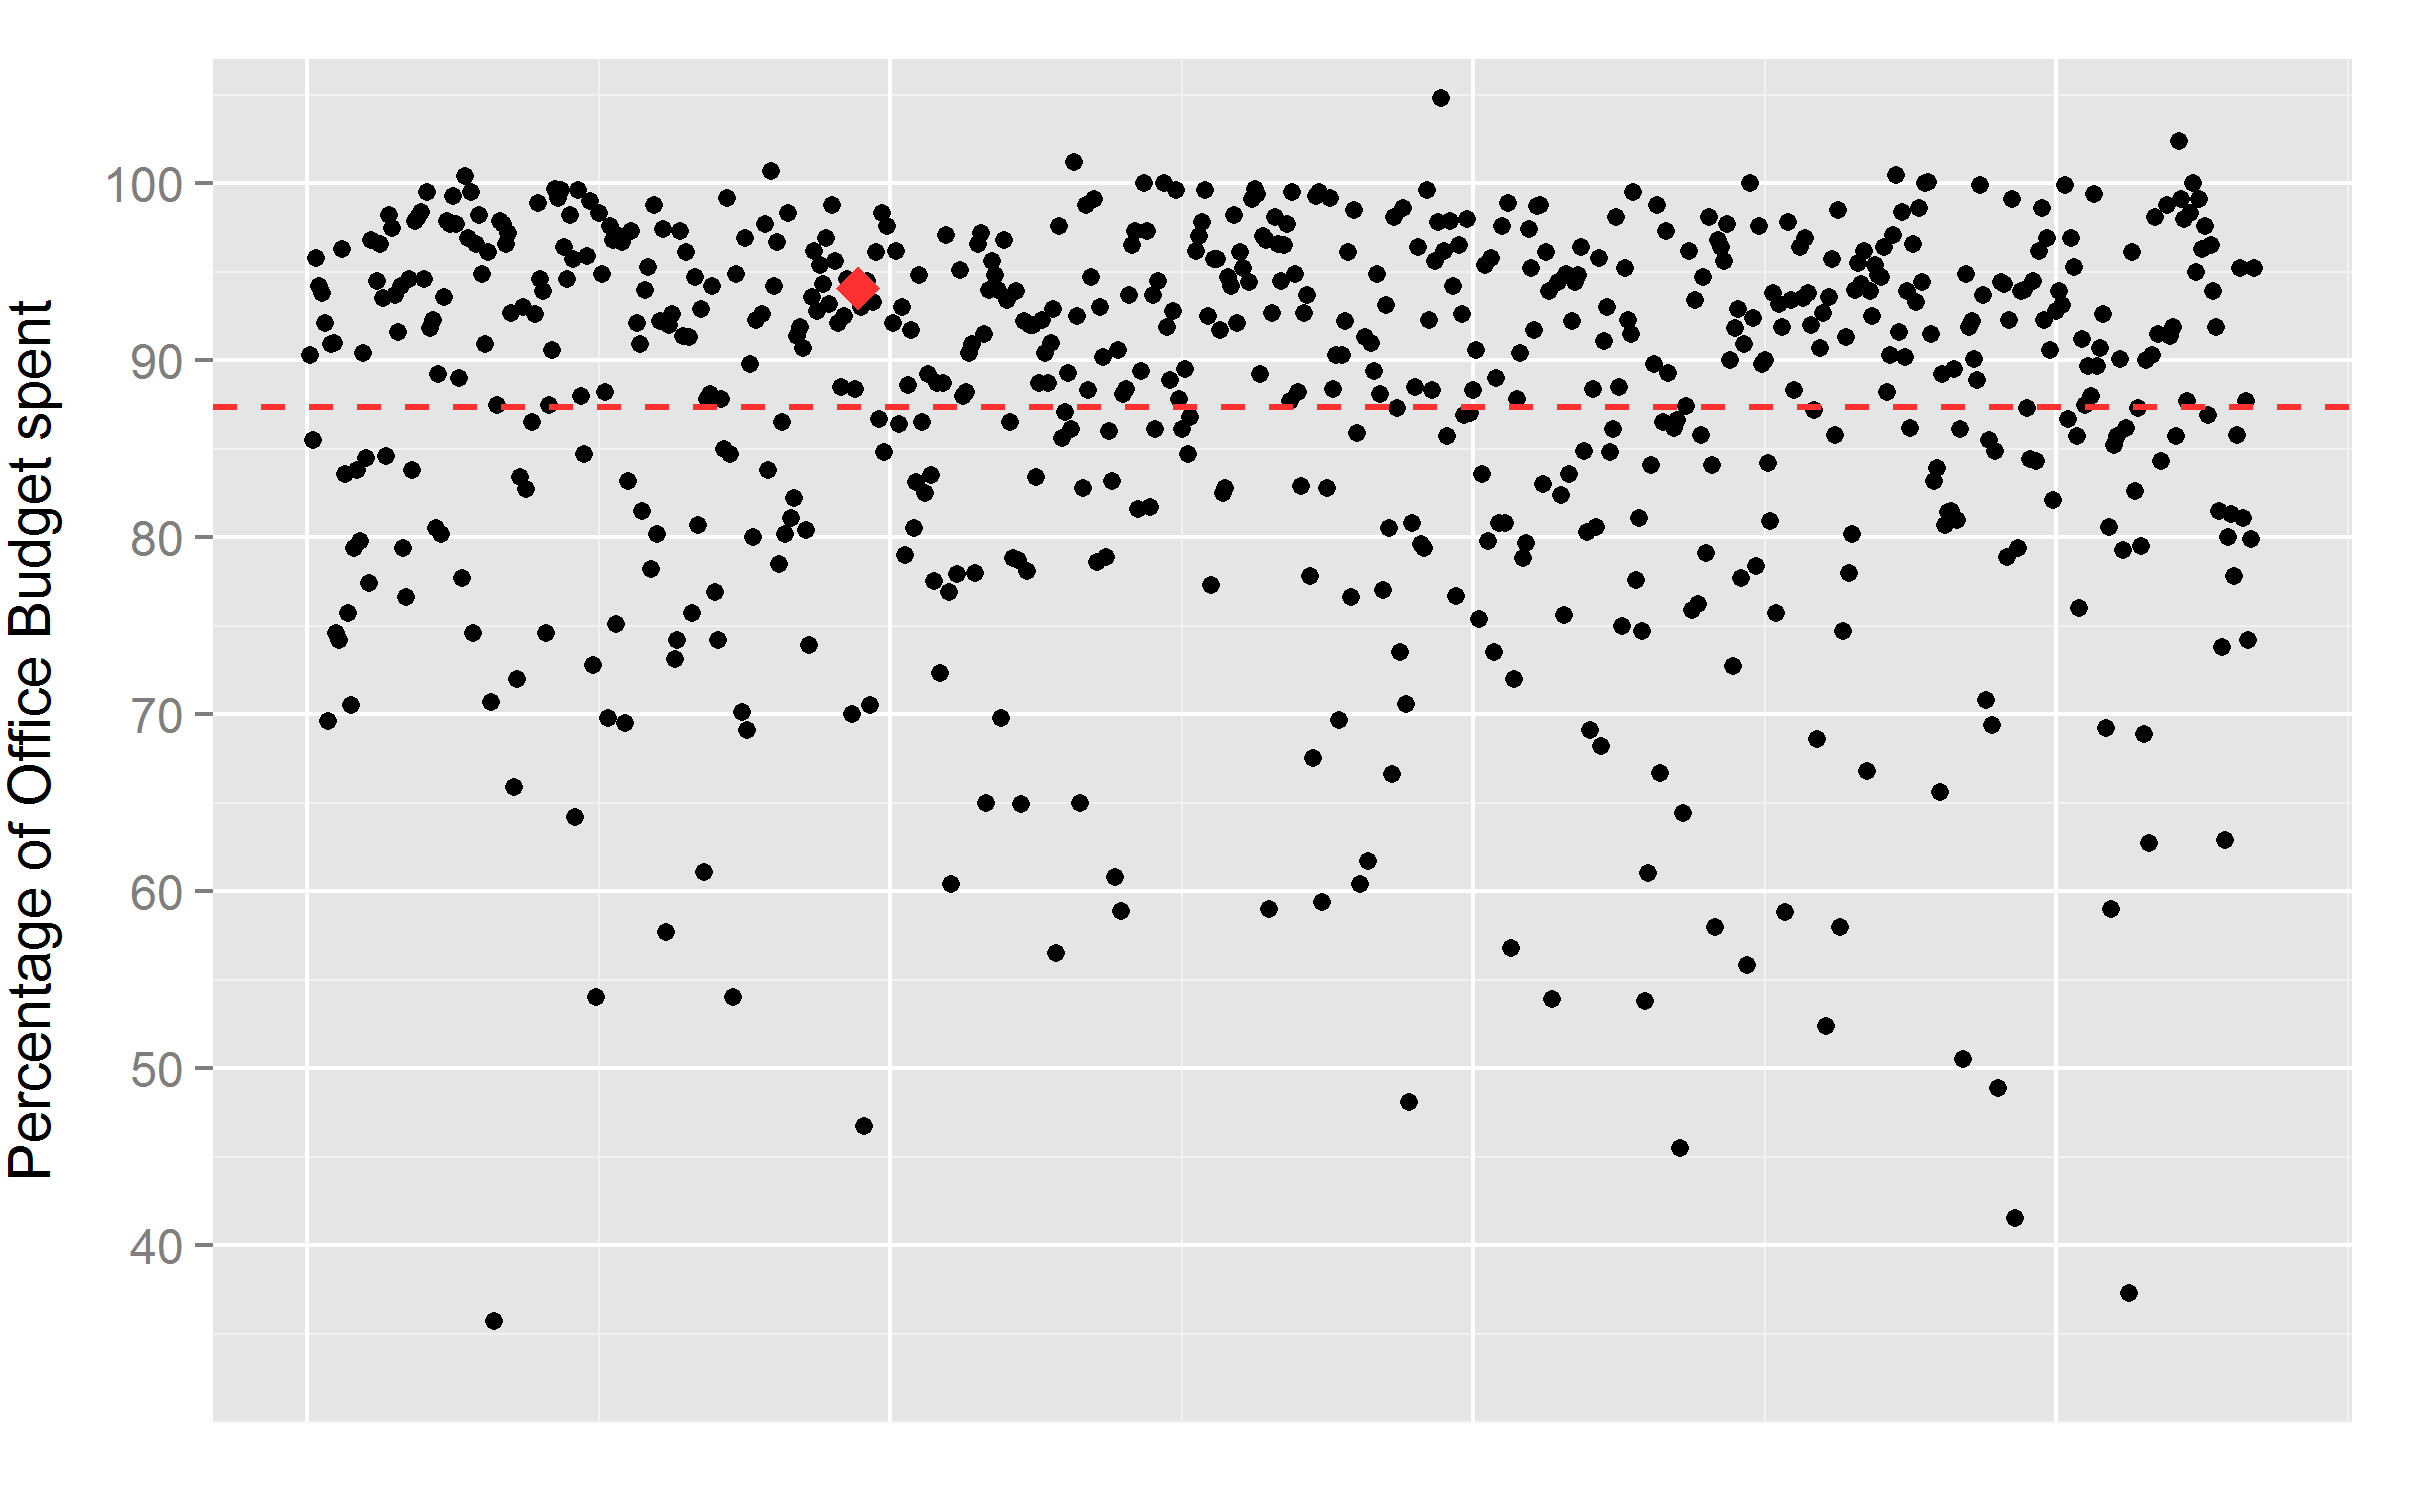 Graph 2: Percentage MPs spent as measured by their overall office budget. Each dot repre-sents individual MP. Dotted line represents average. Red dot identifies MP Jo Swinson (at 94%).